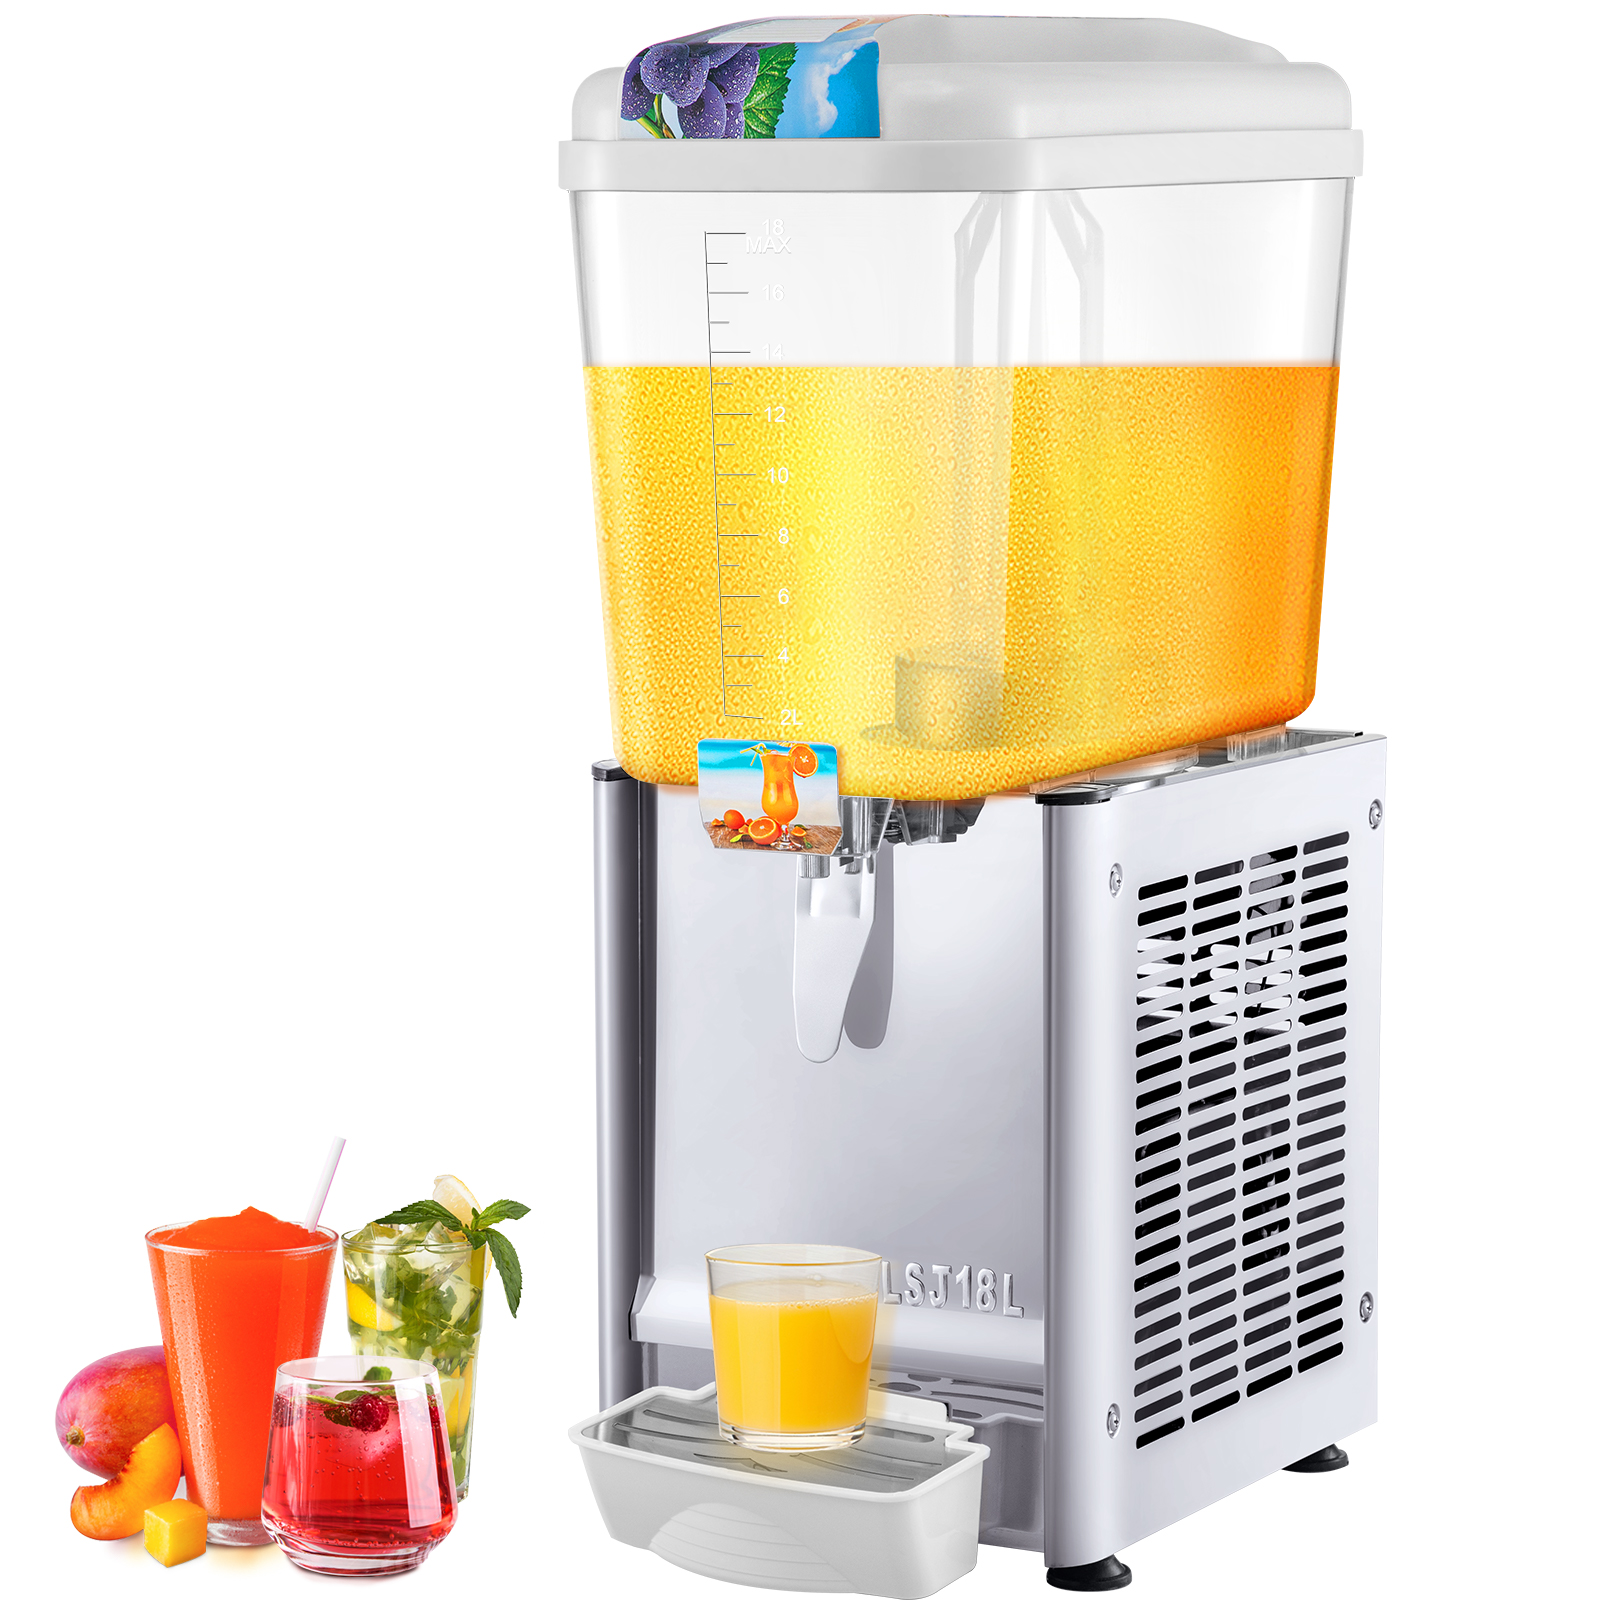 WhizMax 115V Commercial Beverage Dispenser 4.8 Gallon, Ice Tea Cold Drink  Machine with Thermostat Controller 